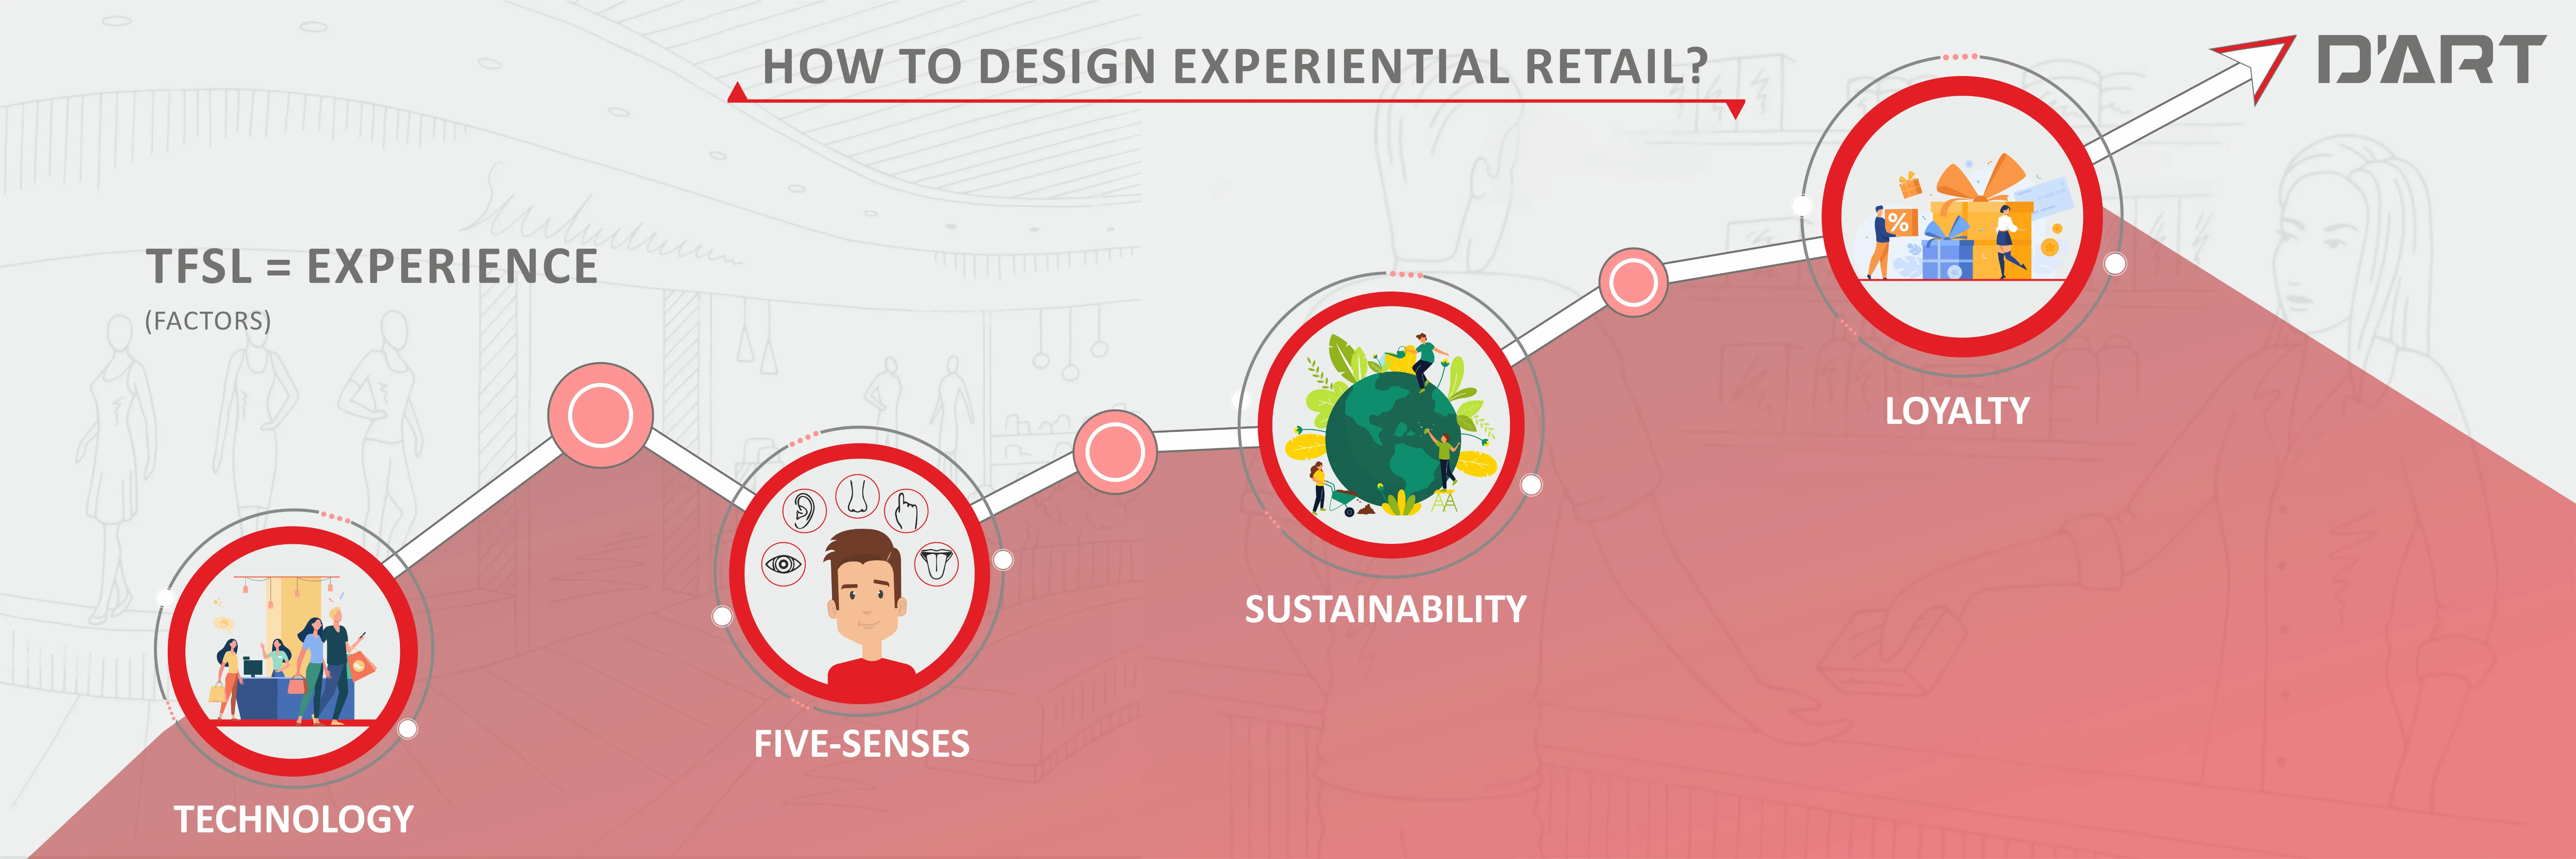 How To Design Experiential Retail